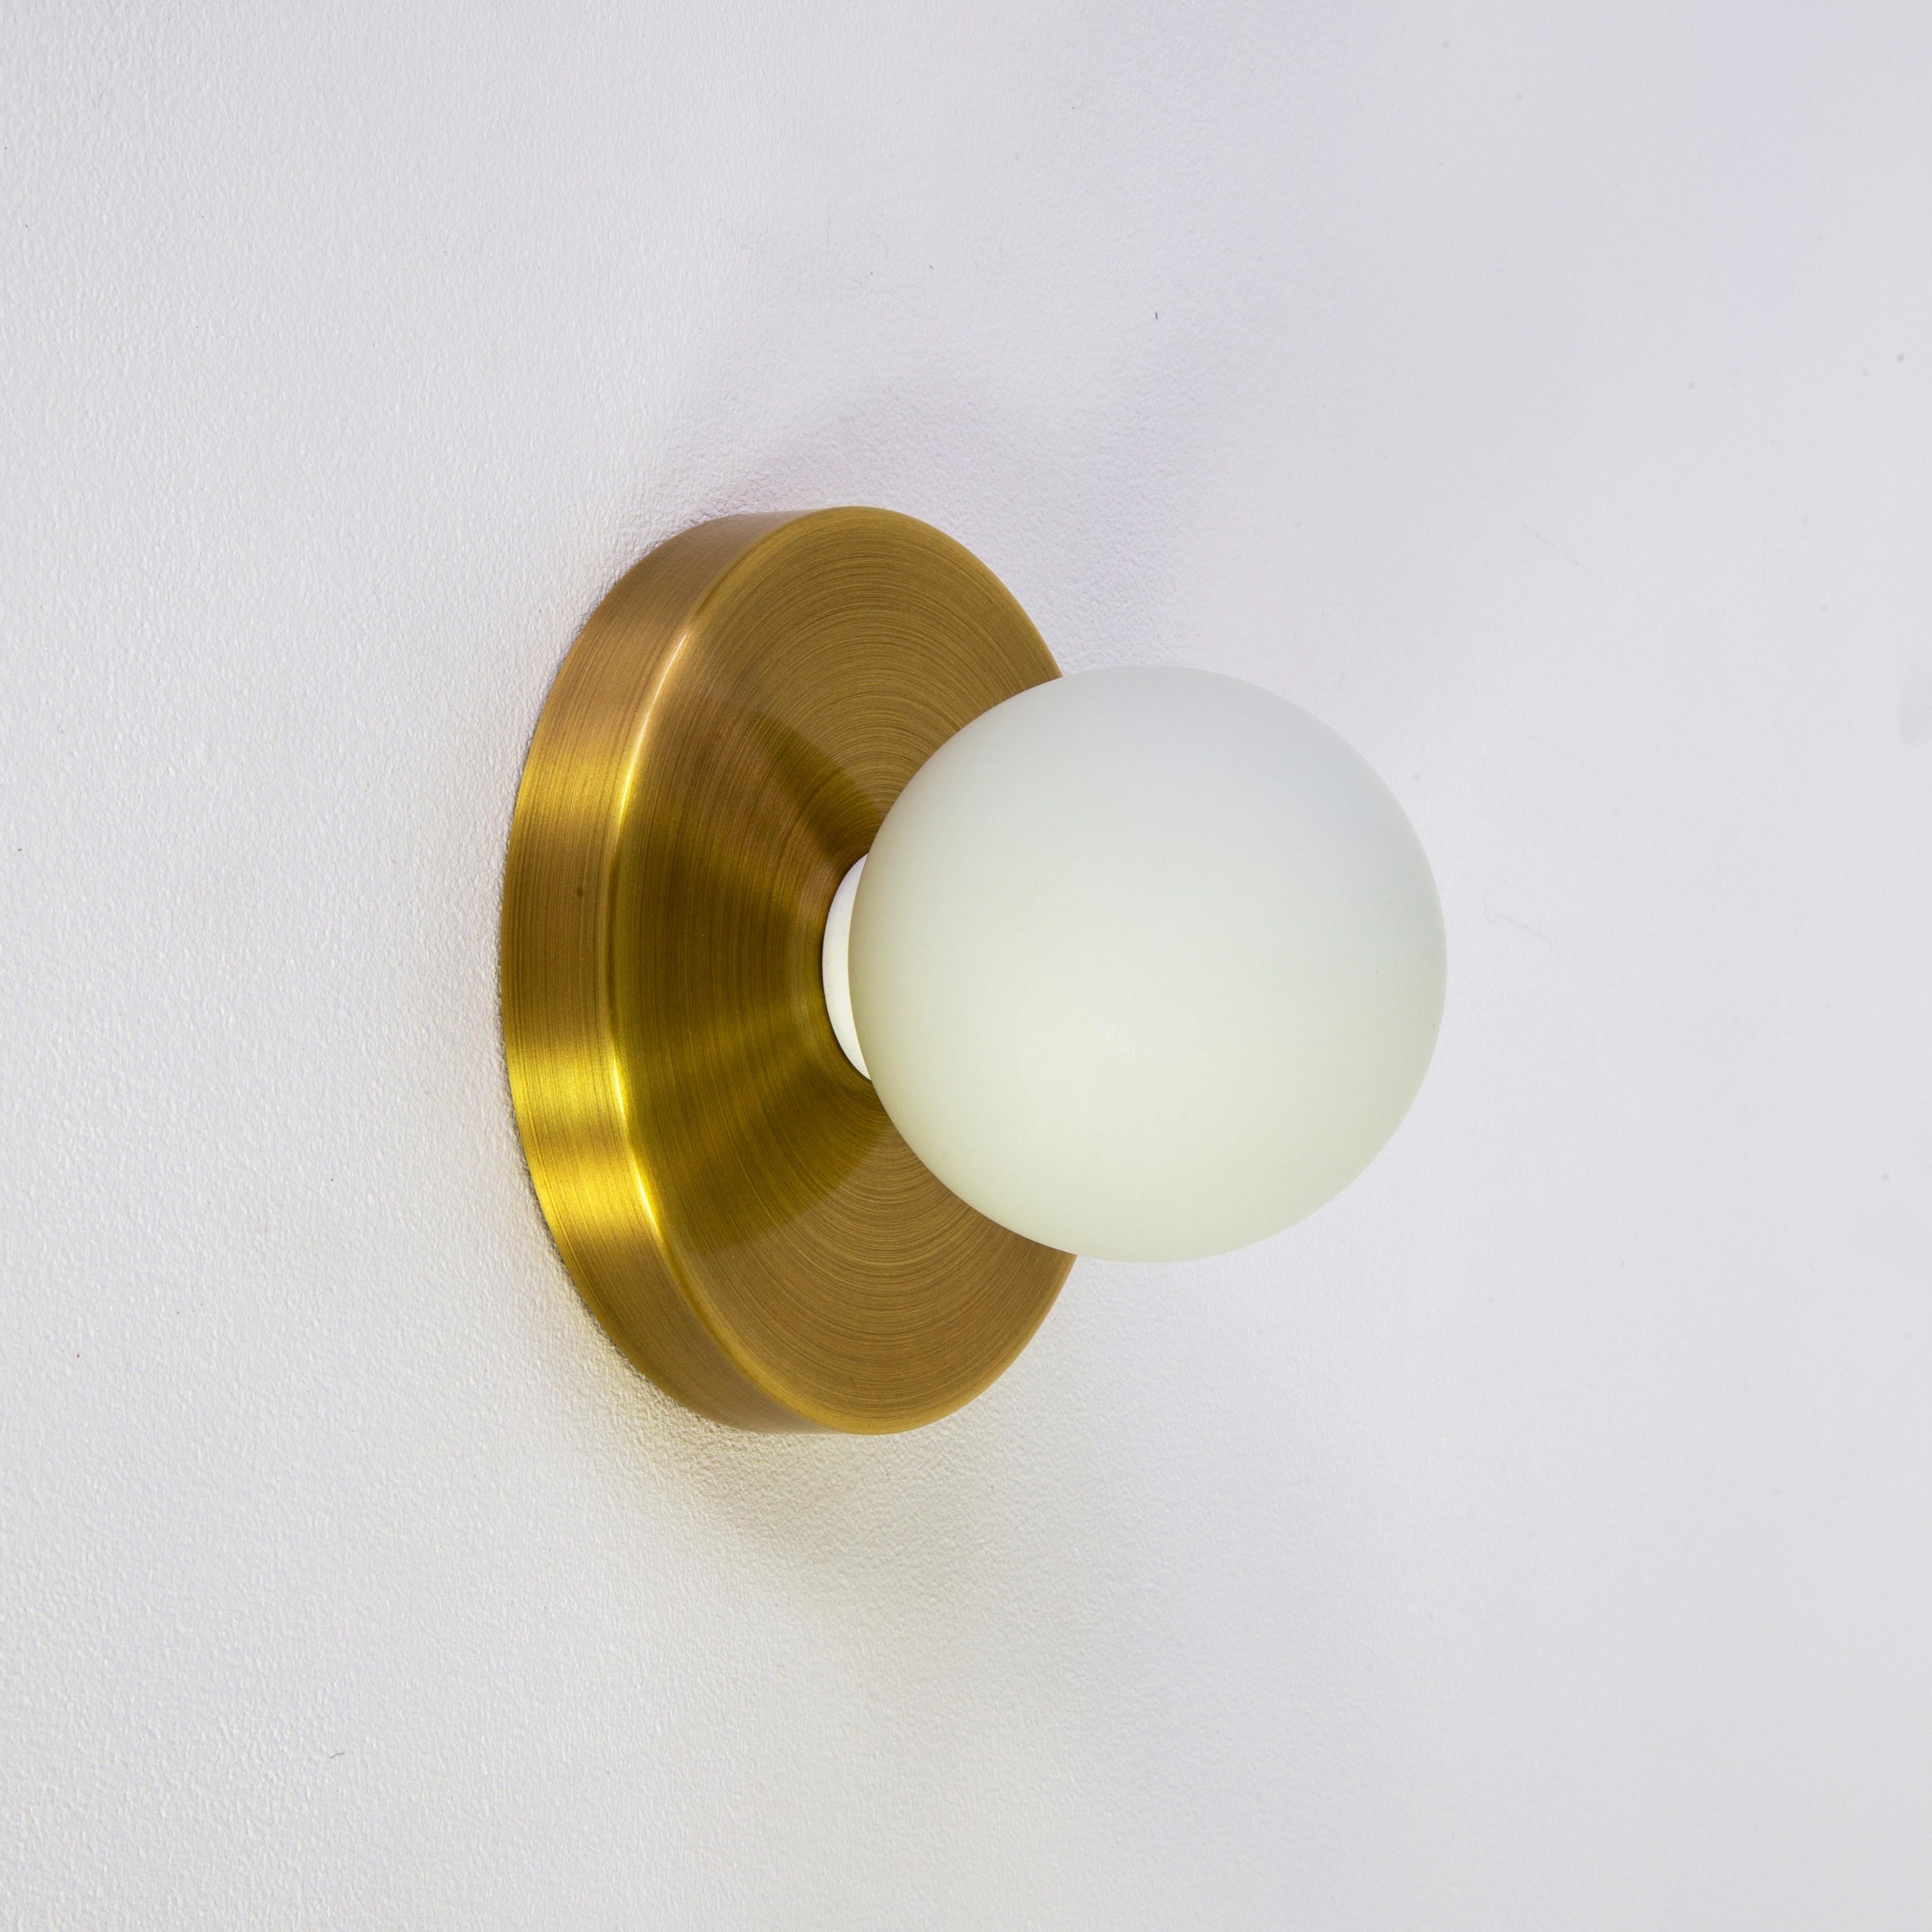 This listing is for 1x Globe Sconce in brushed brass designed and manufactured by Research.Lighting.

Materials: Brass, Steel & Glass
Finish: Brushed Brass
Electronics: 1x G9 Socket, 1x 4.5 Watt LED Bulb (included), 450 Lumens
ADA Compliant. UL